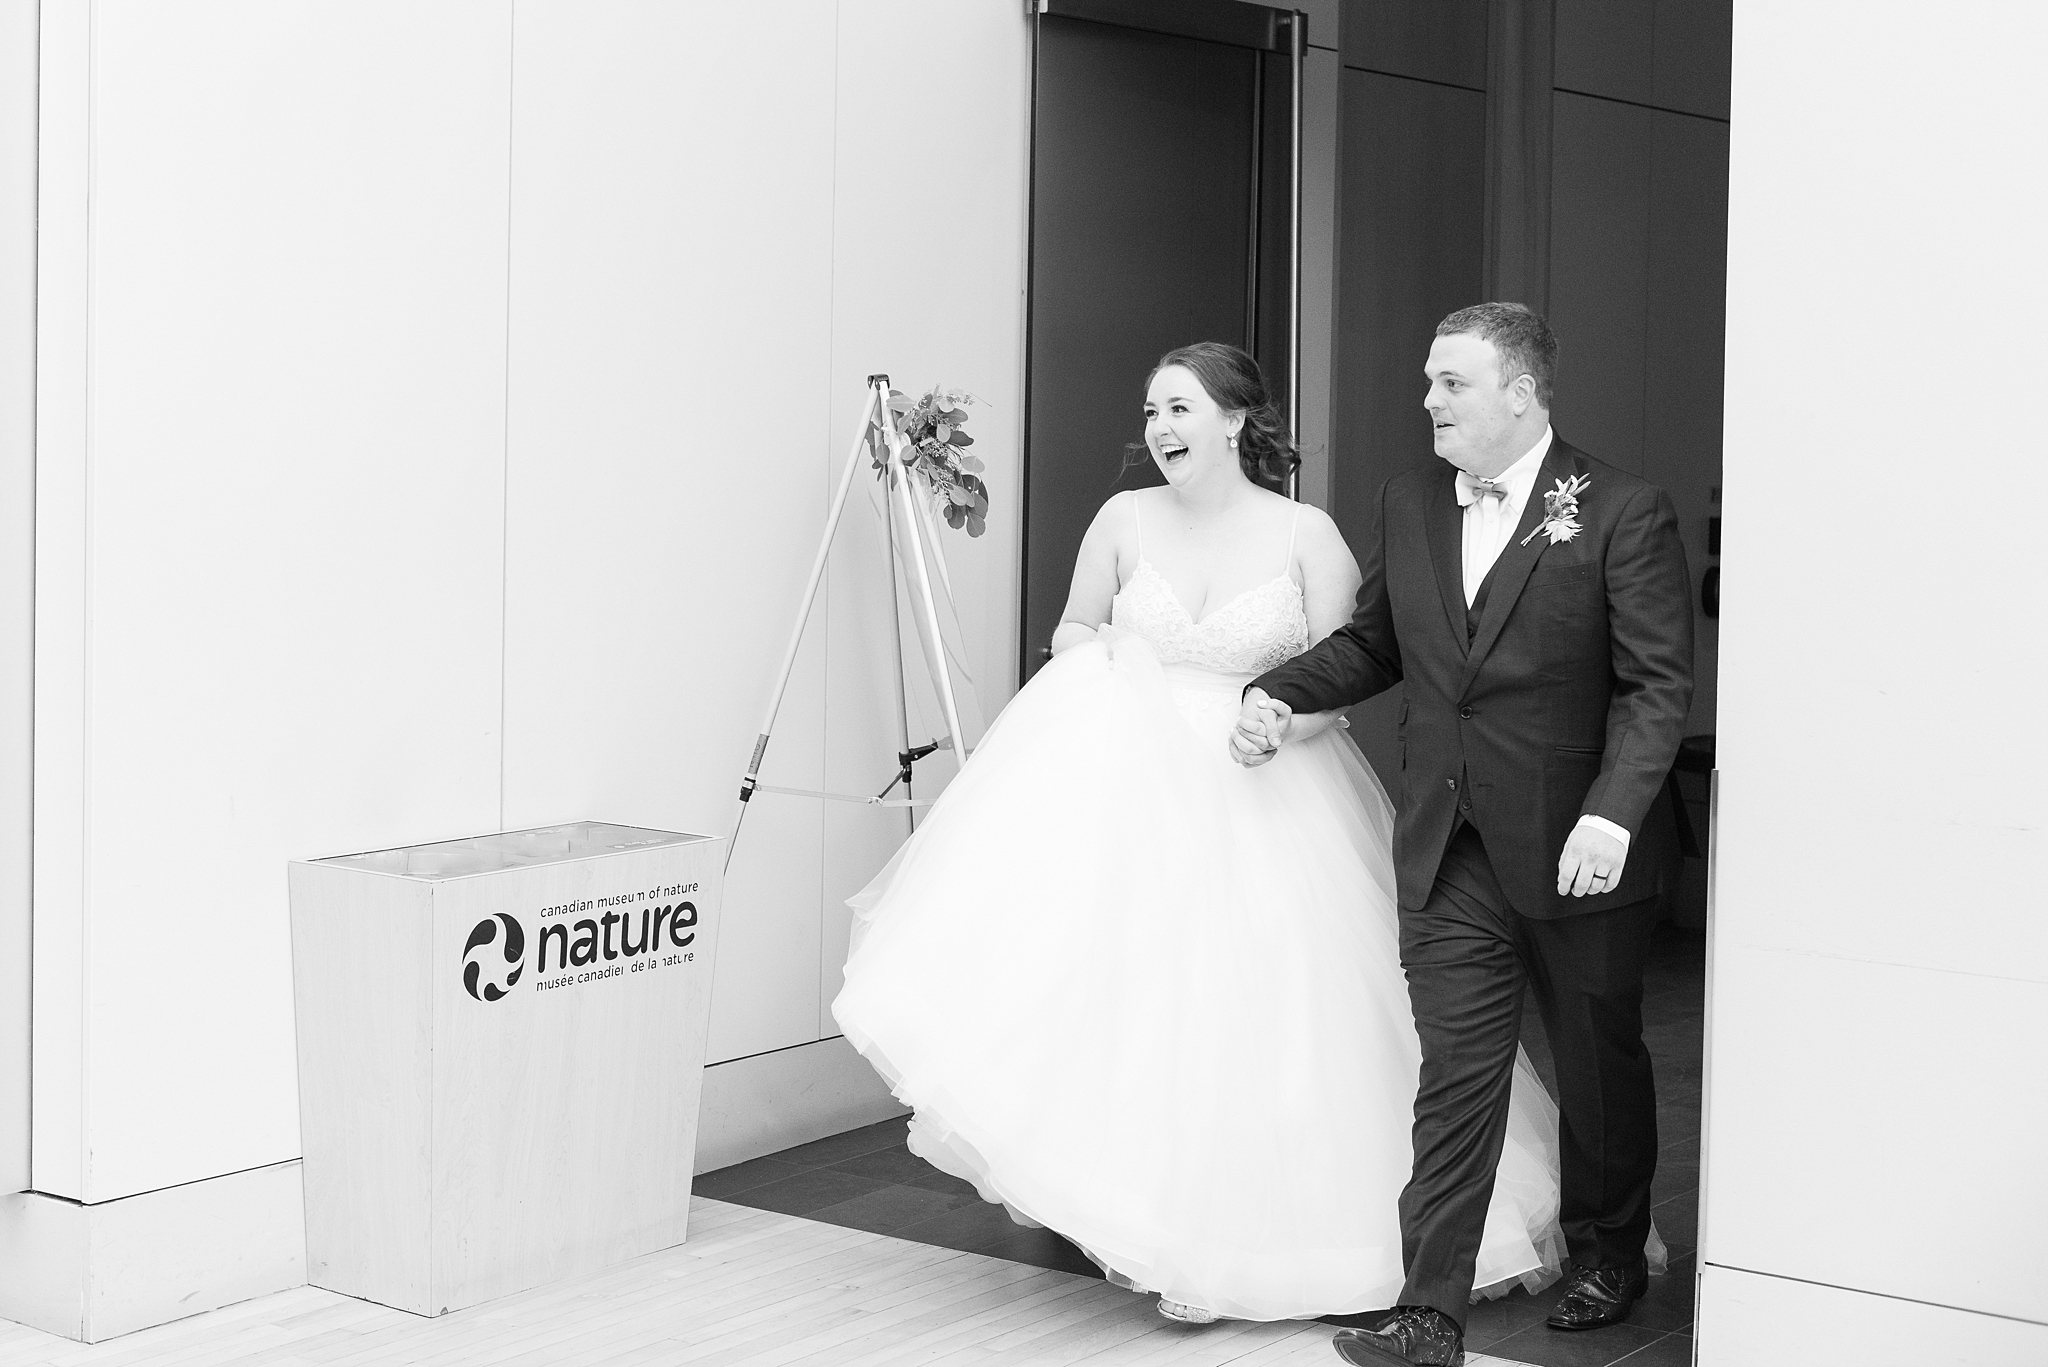 Autumn Wedding at the Canadian Museum of Nature | Ottawa Wedding | Wedding photos at the Canadian Museum of Nature Get more inspiration from this lovely autumn wedding. #ottawawedding #weddingphotography #ottawaweddings